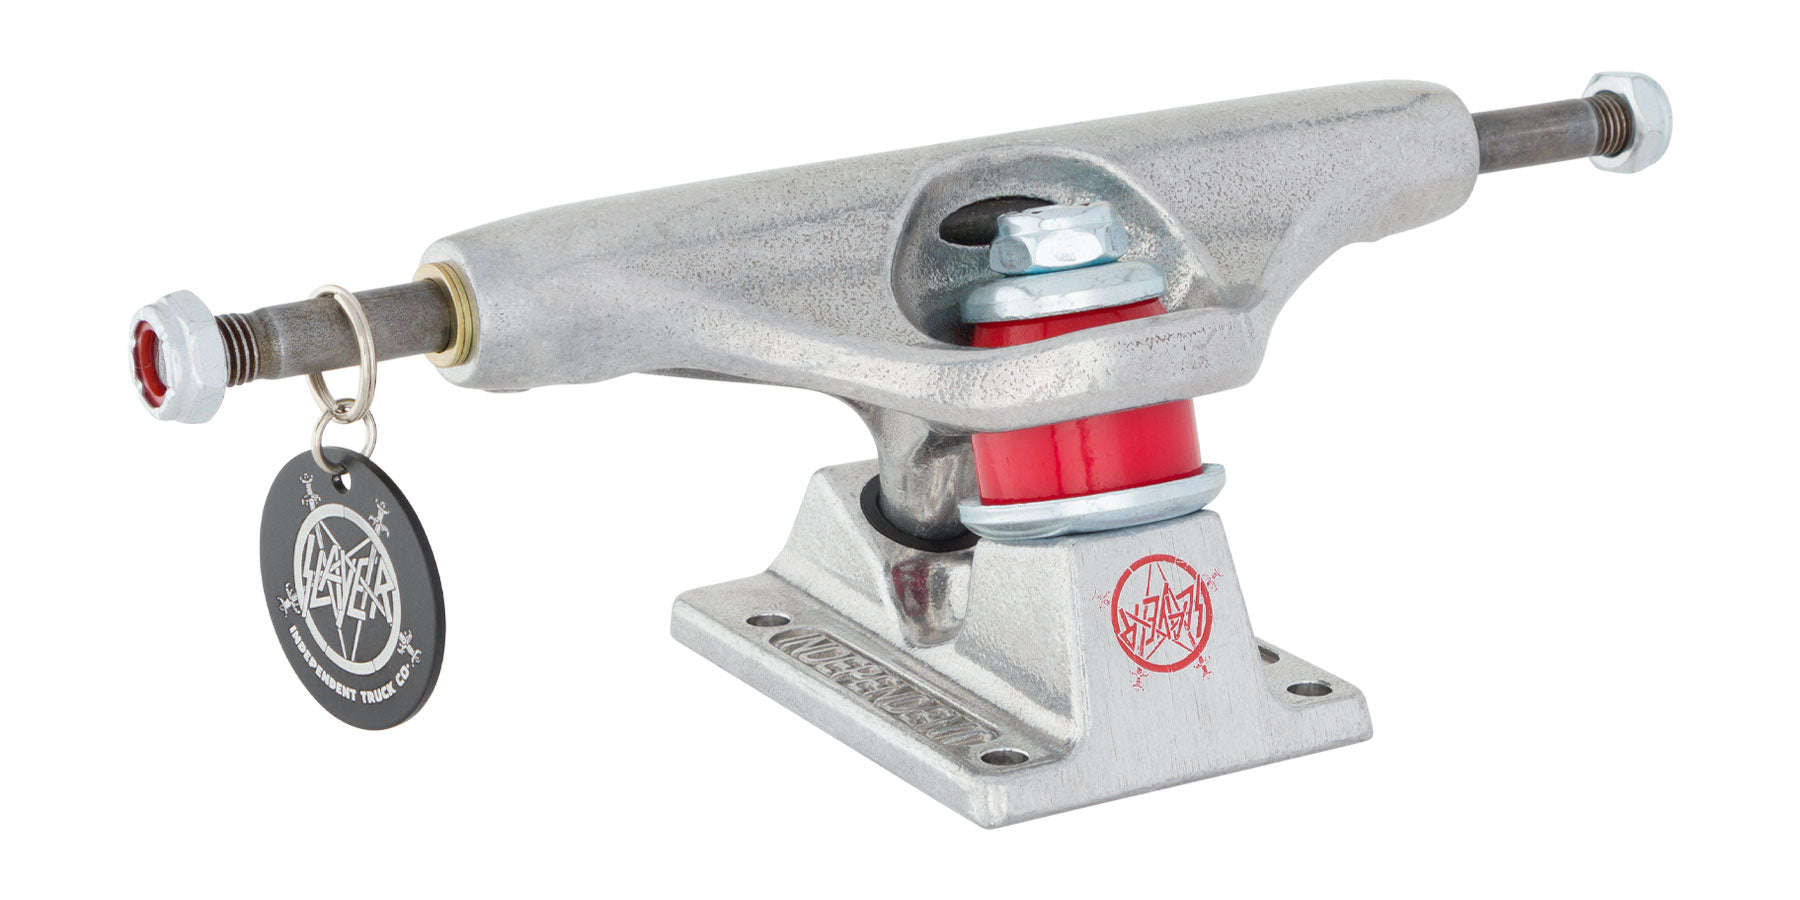 Independent Stage 11 Forged Hollow Polished Slayer Standard Skateboard Trucks - Invisible Board Shop